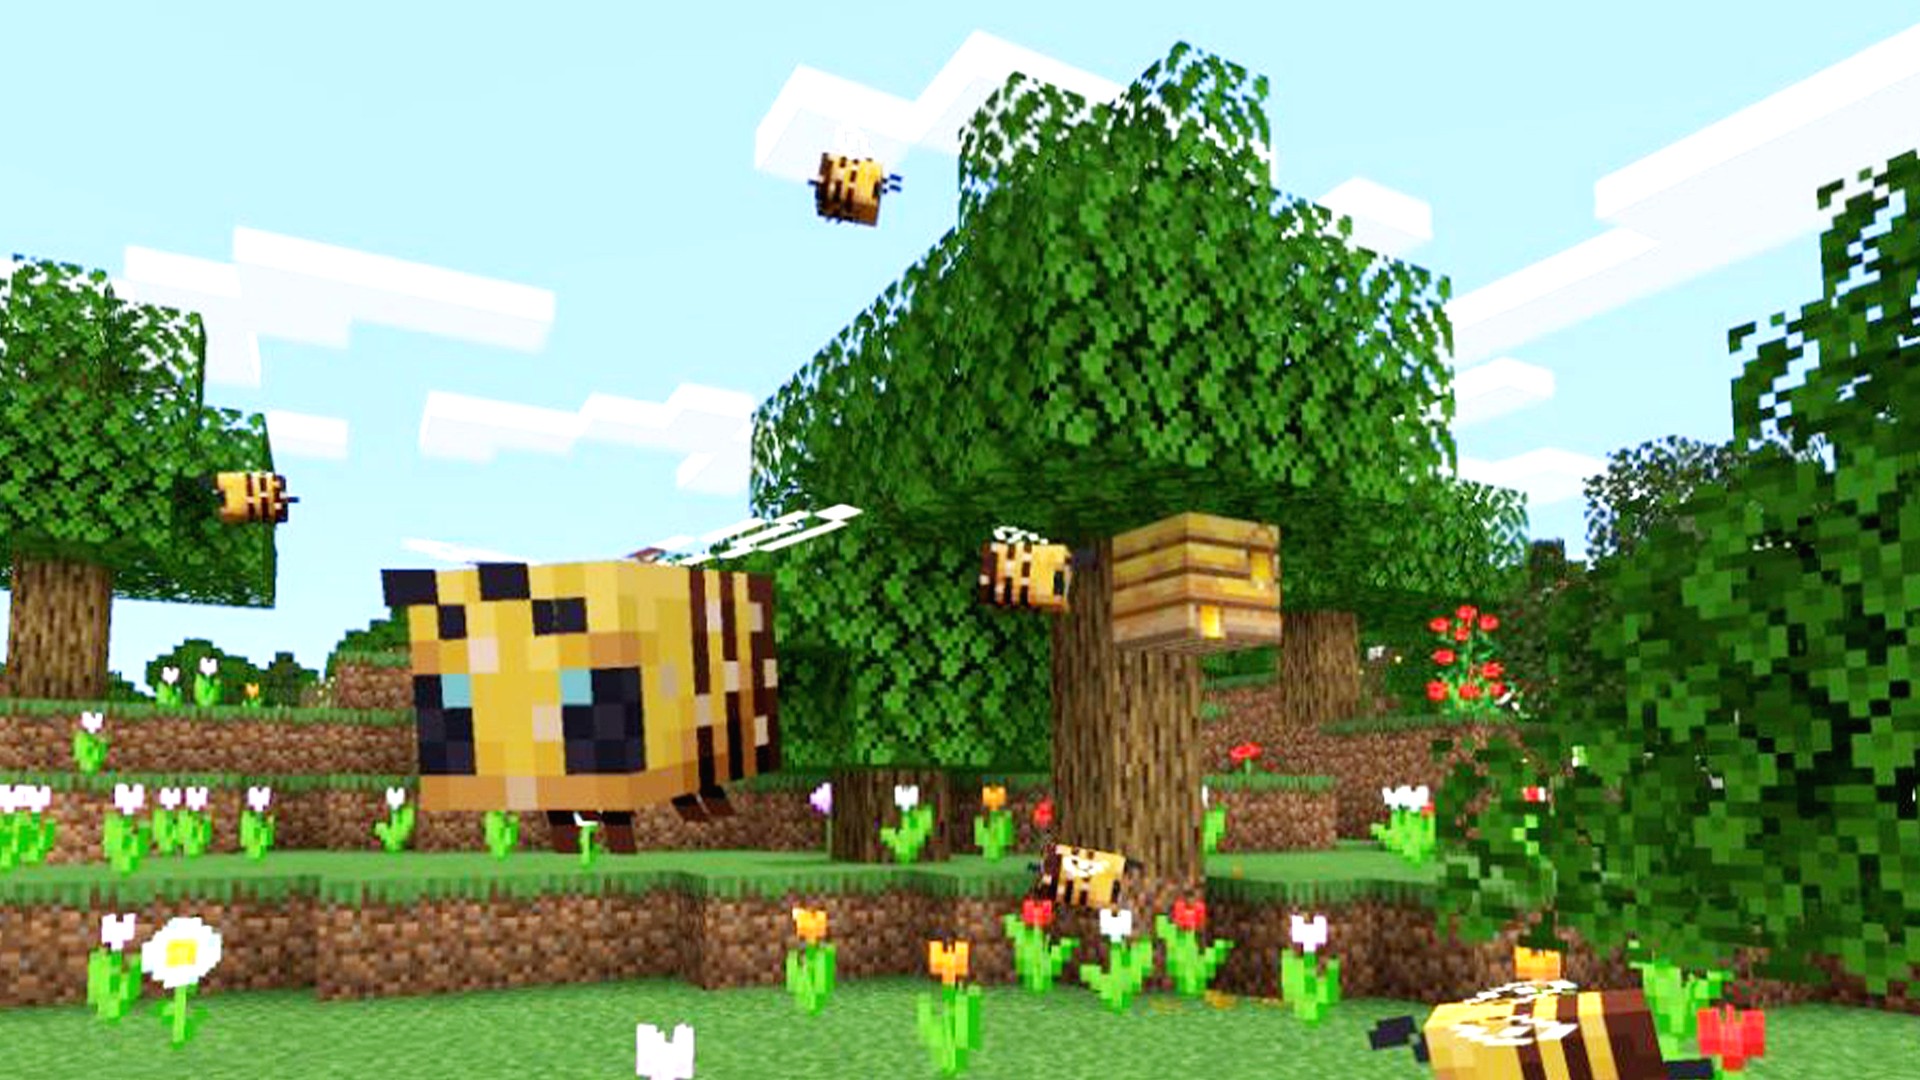 Minecraft bees: how to find bees and harvest honey